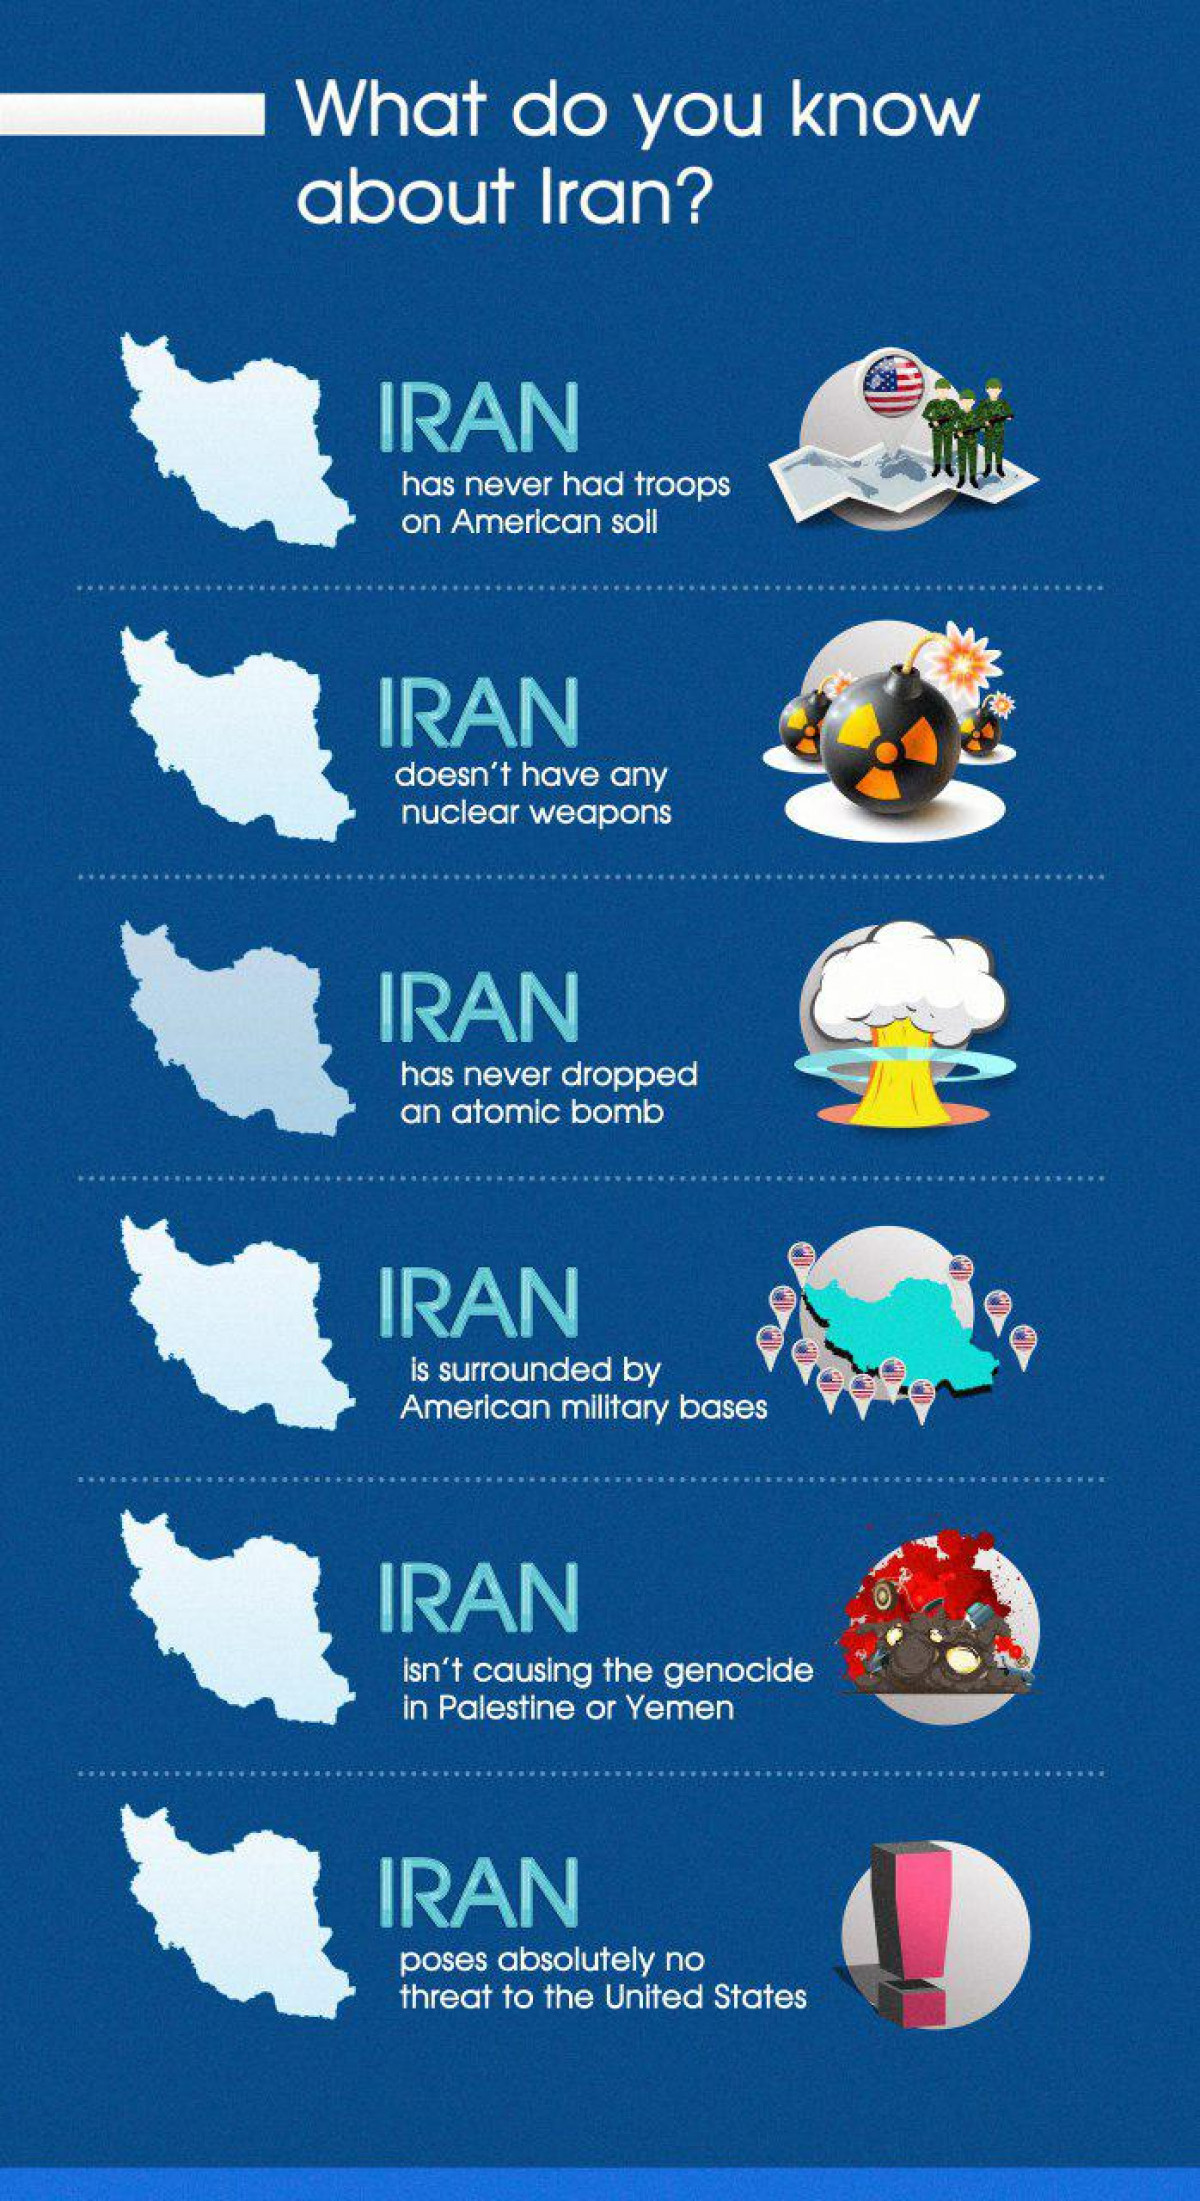 Wath do you know about Iran?